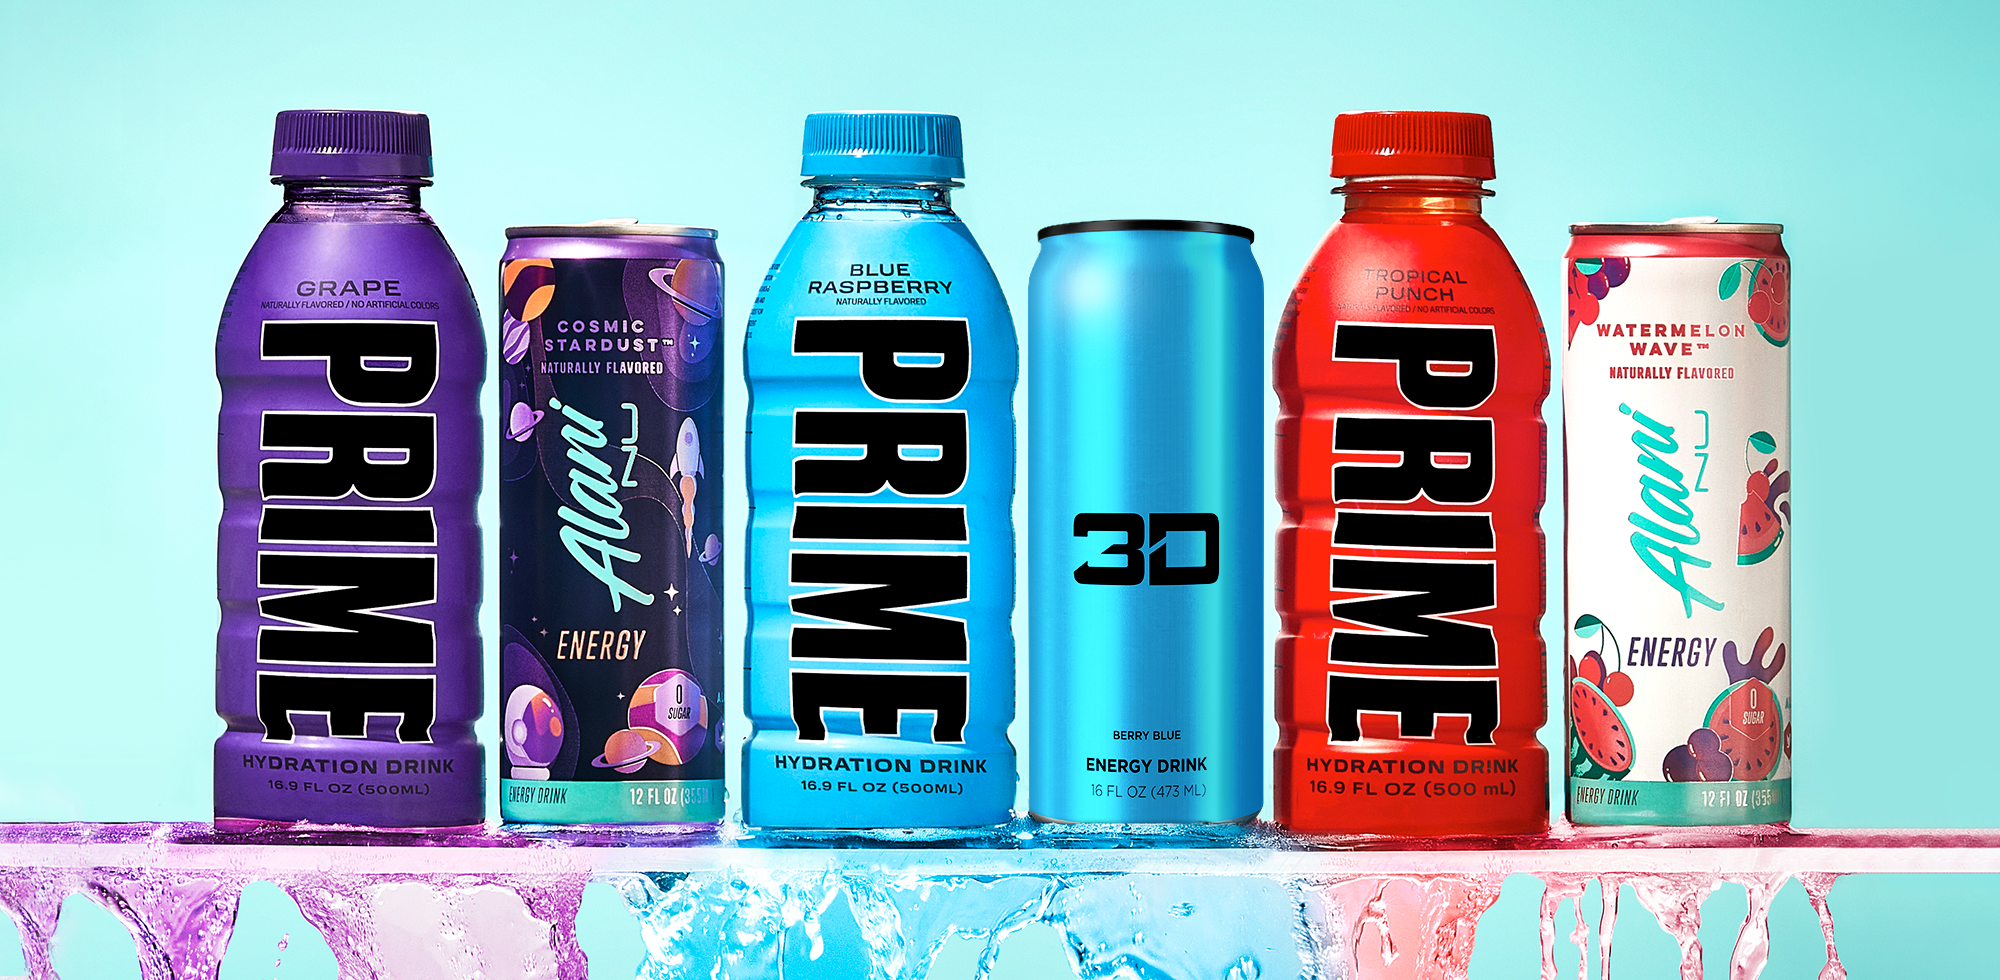 A vibrant arrangement of 'Alani' energy drink cans, 3D energy drinks, and 'PRIME' hydration drink bottles, presented in a cascading, waterfall-like layout, creating a visually dynamic showcase.